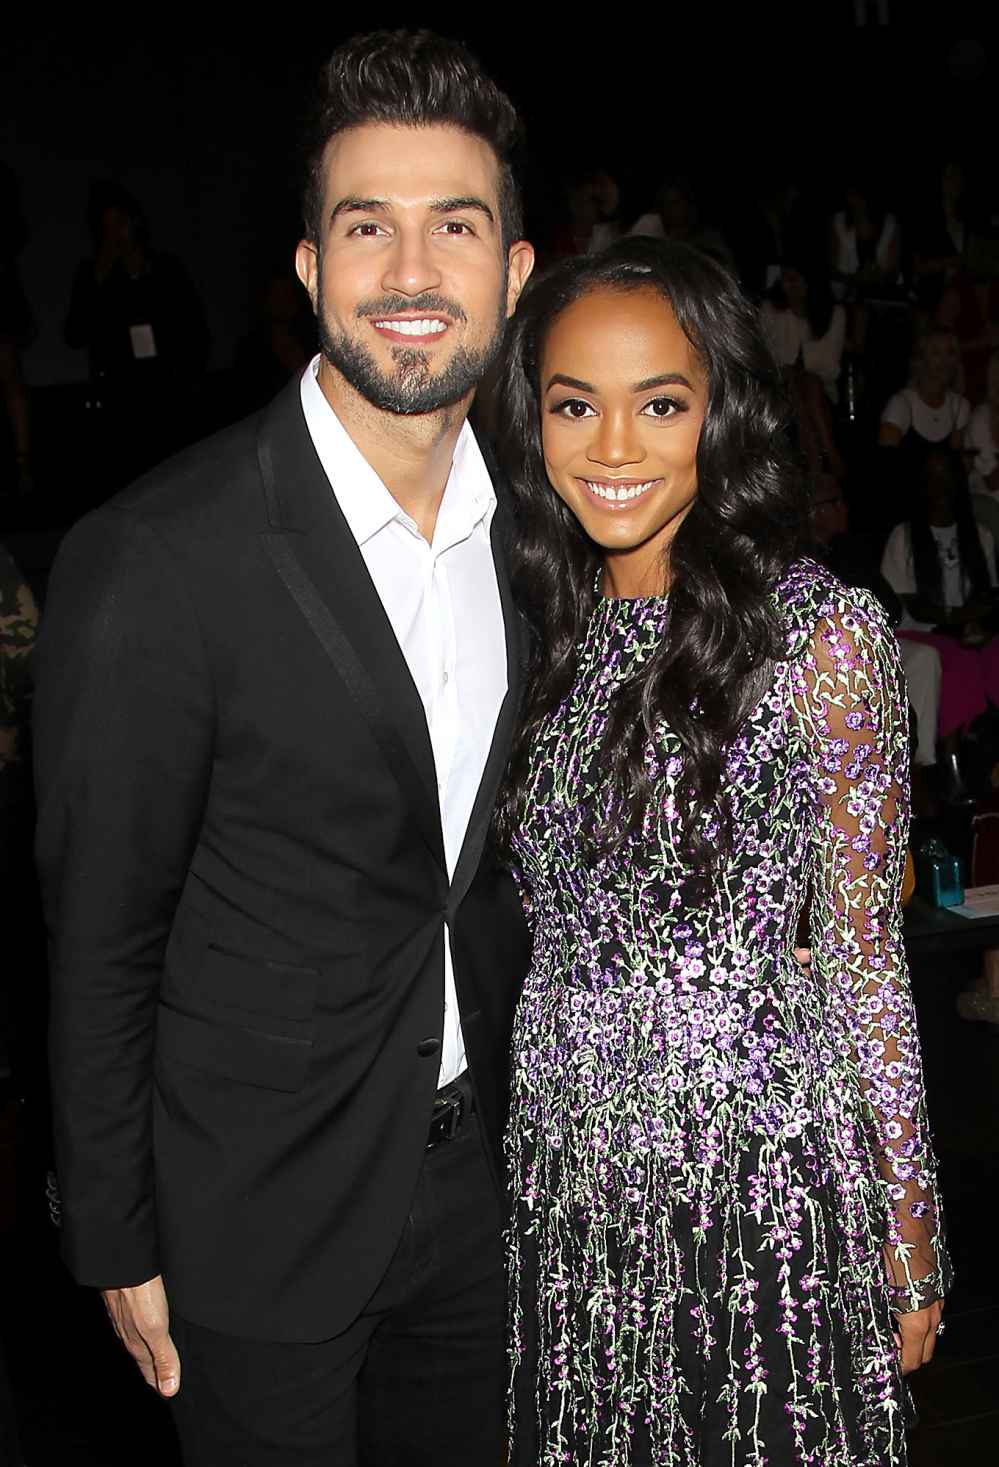 Rachel Lindsay Ive Had Tough Discussions With Bryan Abasolo About Race